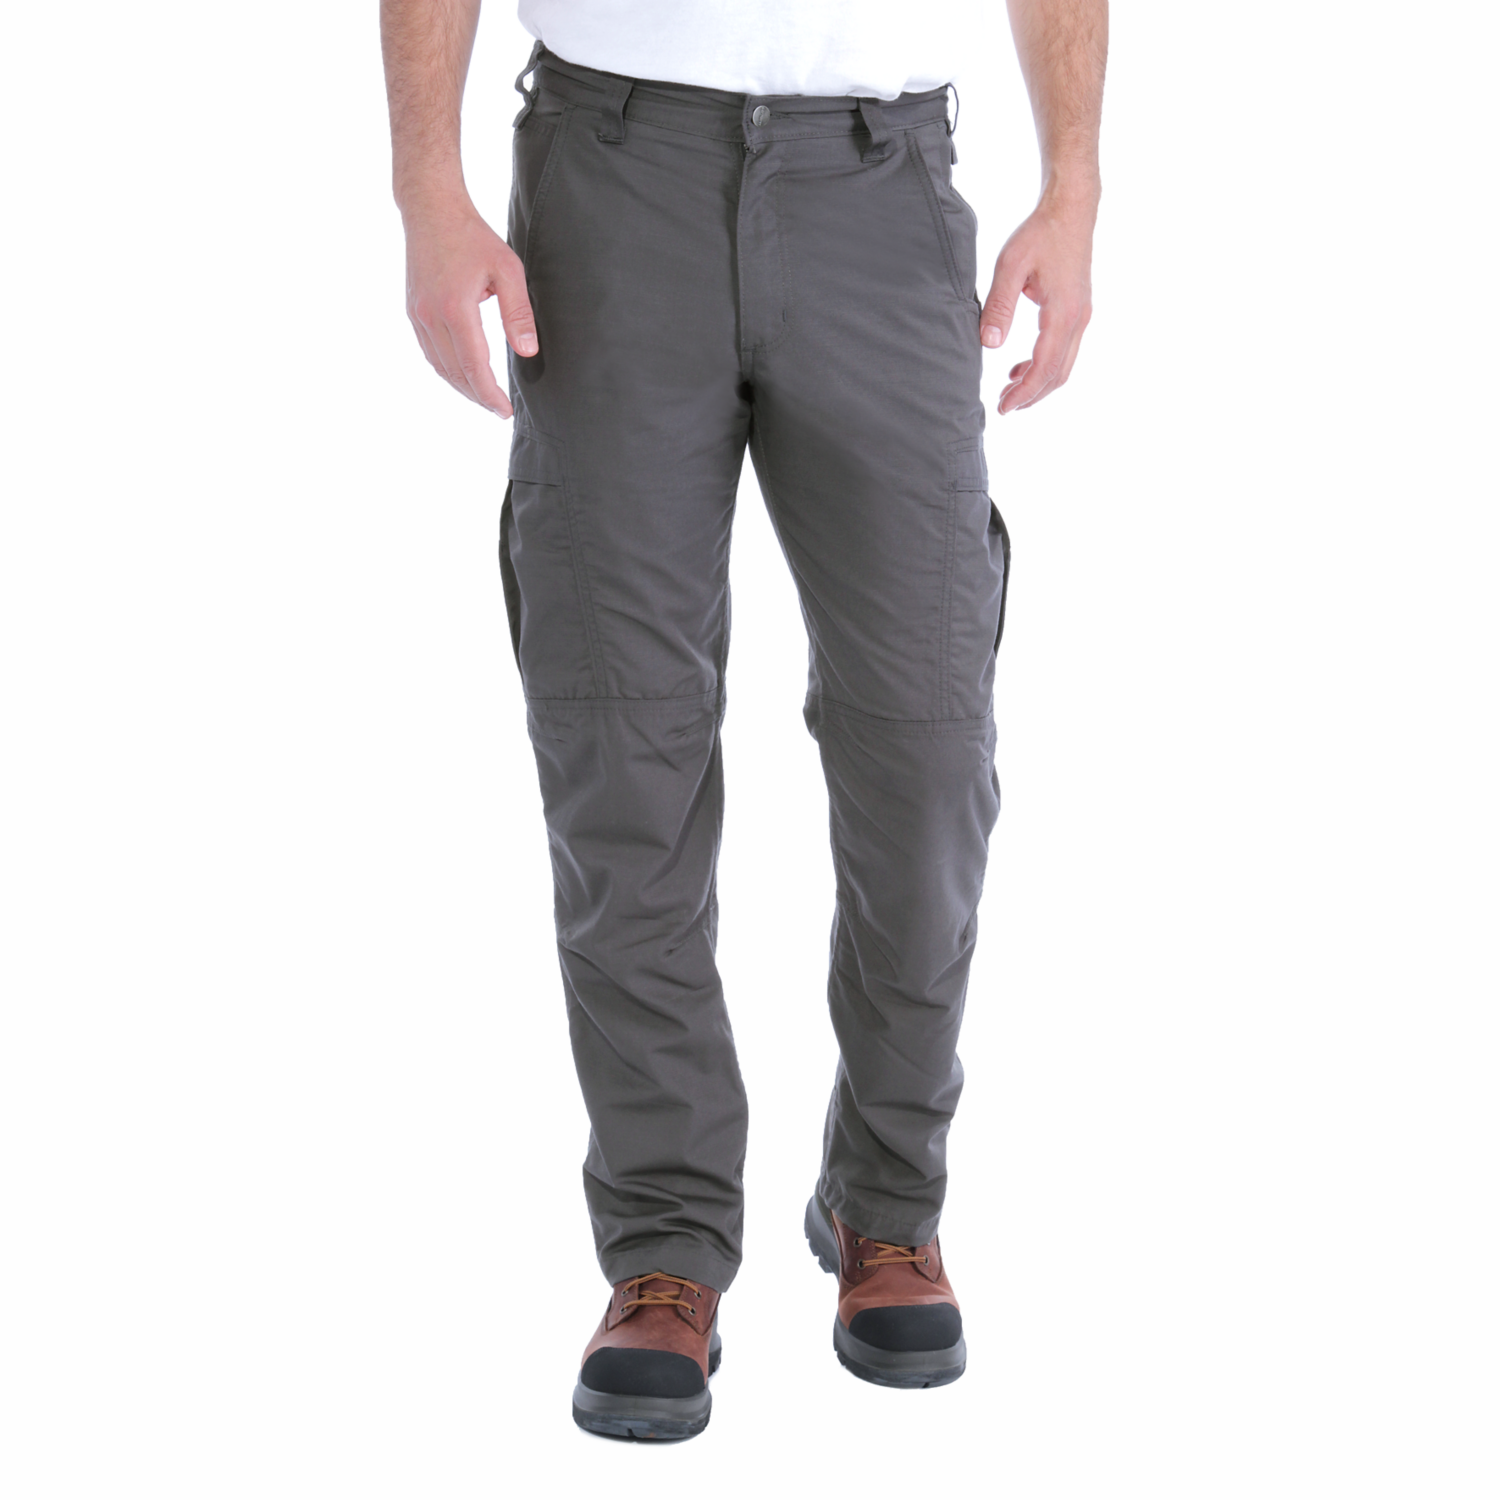 FORCE_EXTREMES_RUGGED_FLEX_PANT_dHqUGBKr4z